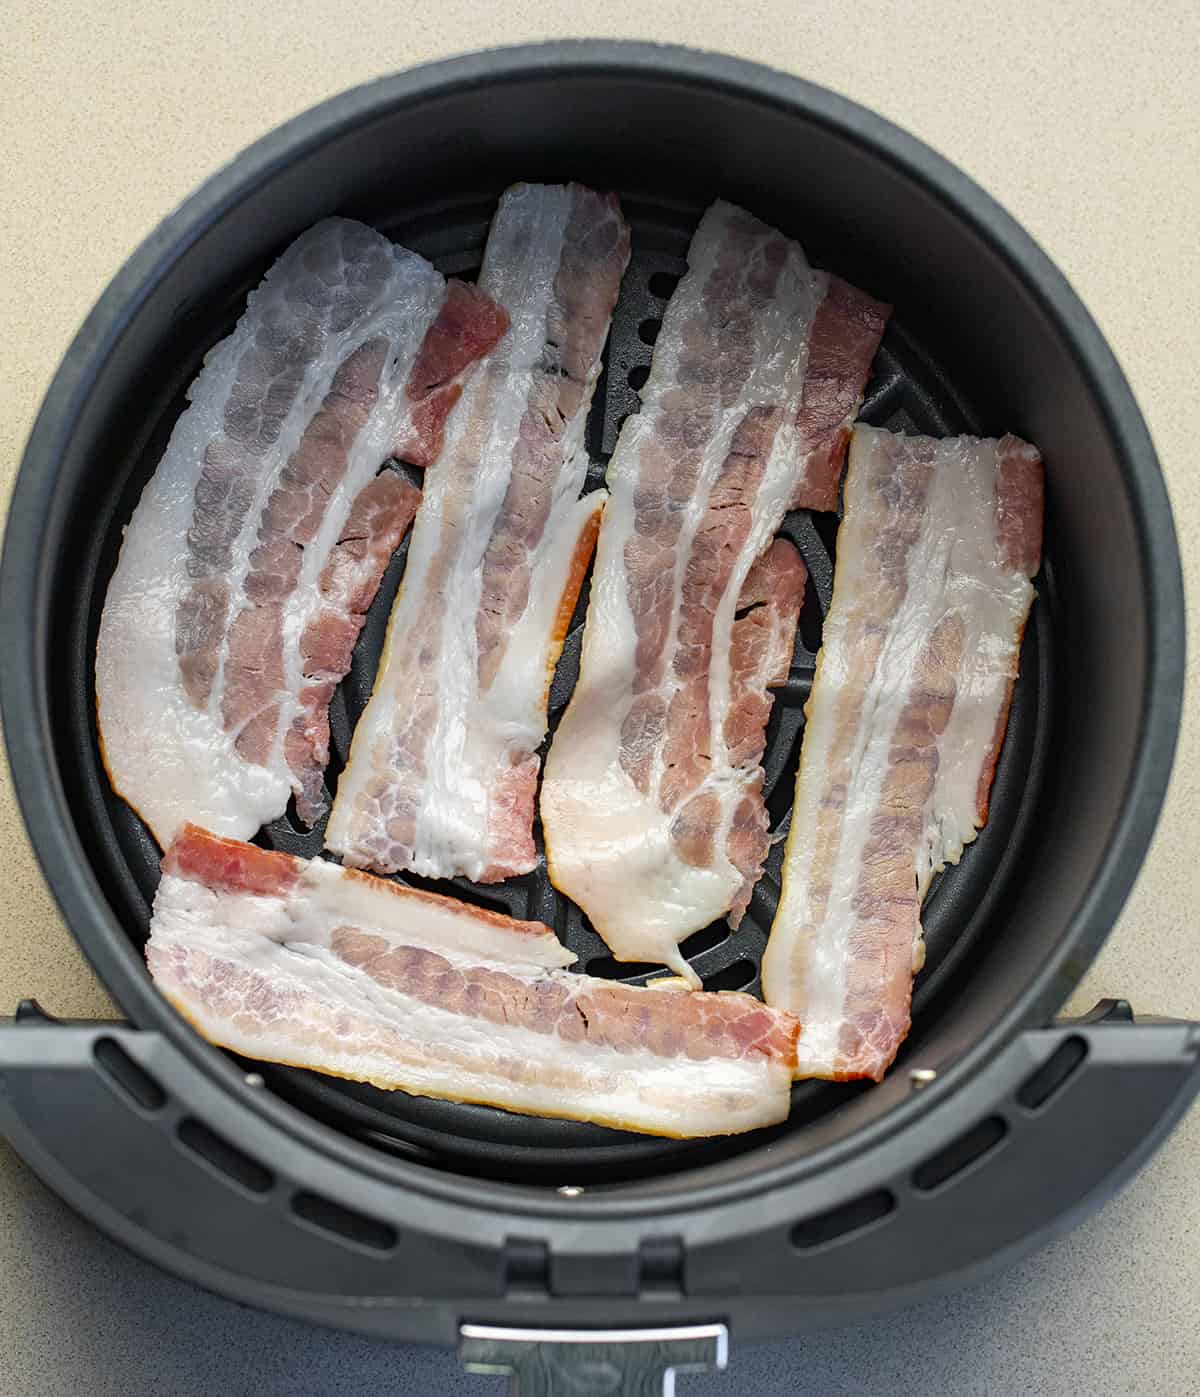 Raw Bacon in Air Fryer Basket Before Frying. Side Dish, How to Make Bacon, Crispy Bacon, Air Fryer Recipes, Breakfast, Breakfast bacon, Easy Bacon, Quick Bacon, i am homesteader, iamhomesteader